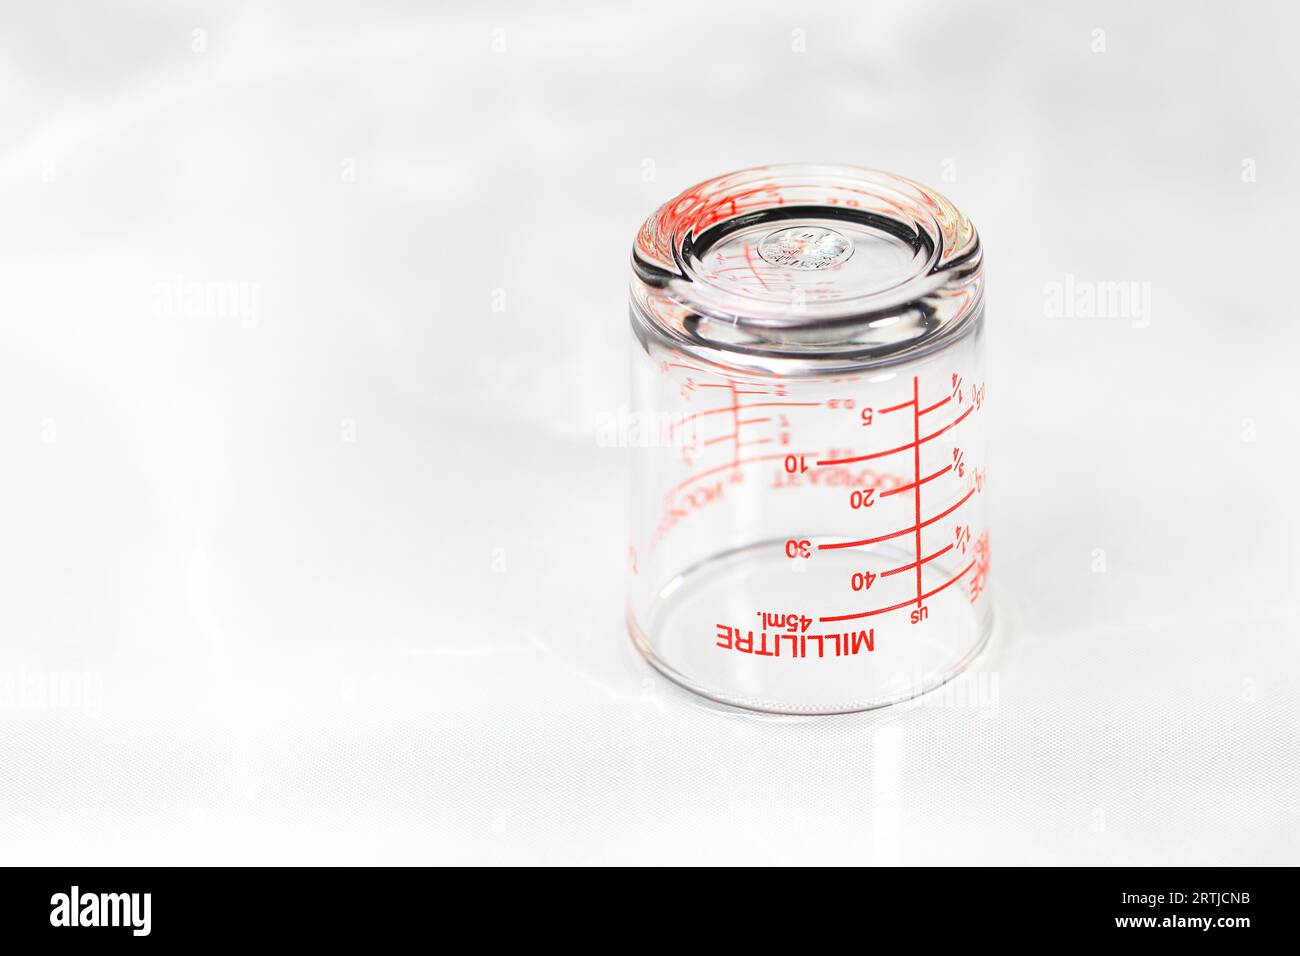 https://c8.alamy.com/comp/2RTJCNB/inverted-glass-measuring-cup-or-dosage-cup-with-milliliter-measurements-displayed-2RTJCNB.jpg